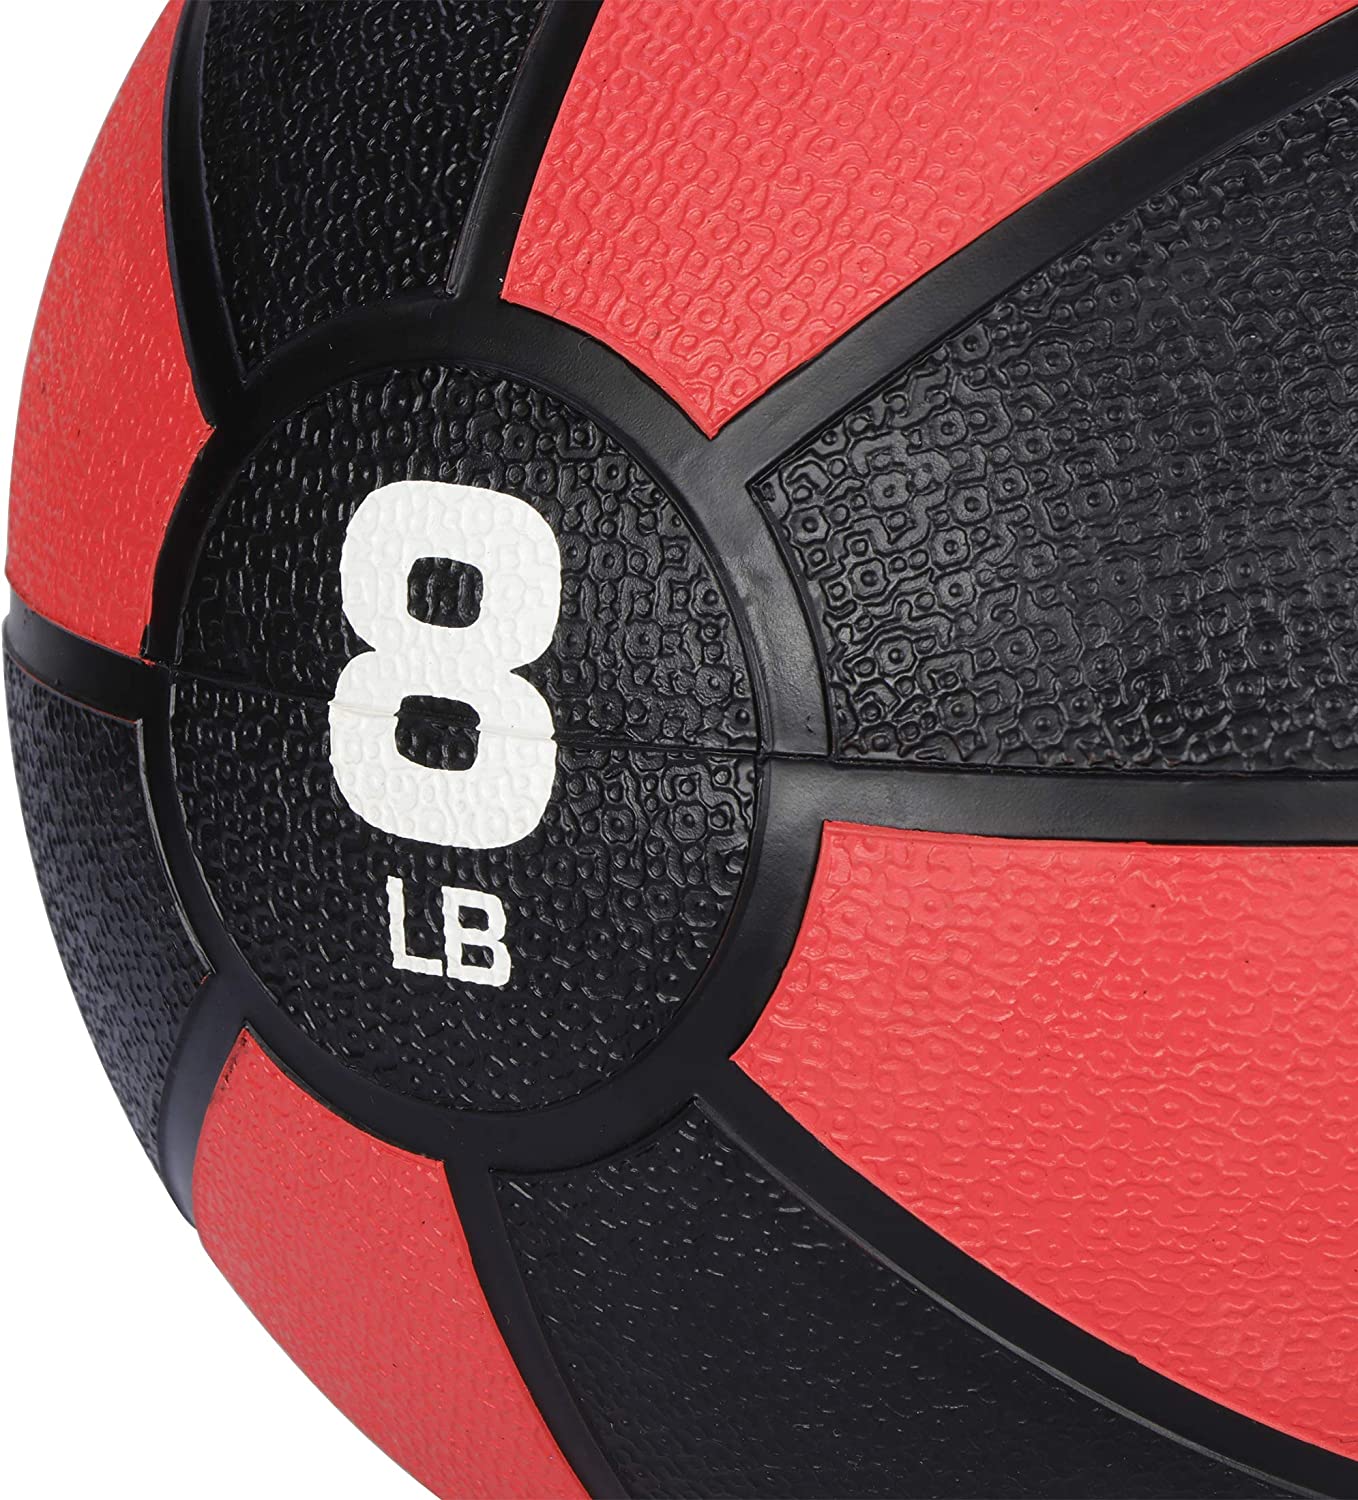 Medicine Balls 8 lb Fitness Exercise Ball Workout Weight Ball for Strength Balance Training Home Gym Cardio Equipment Durable Rubber Ball